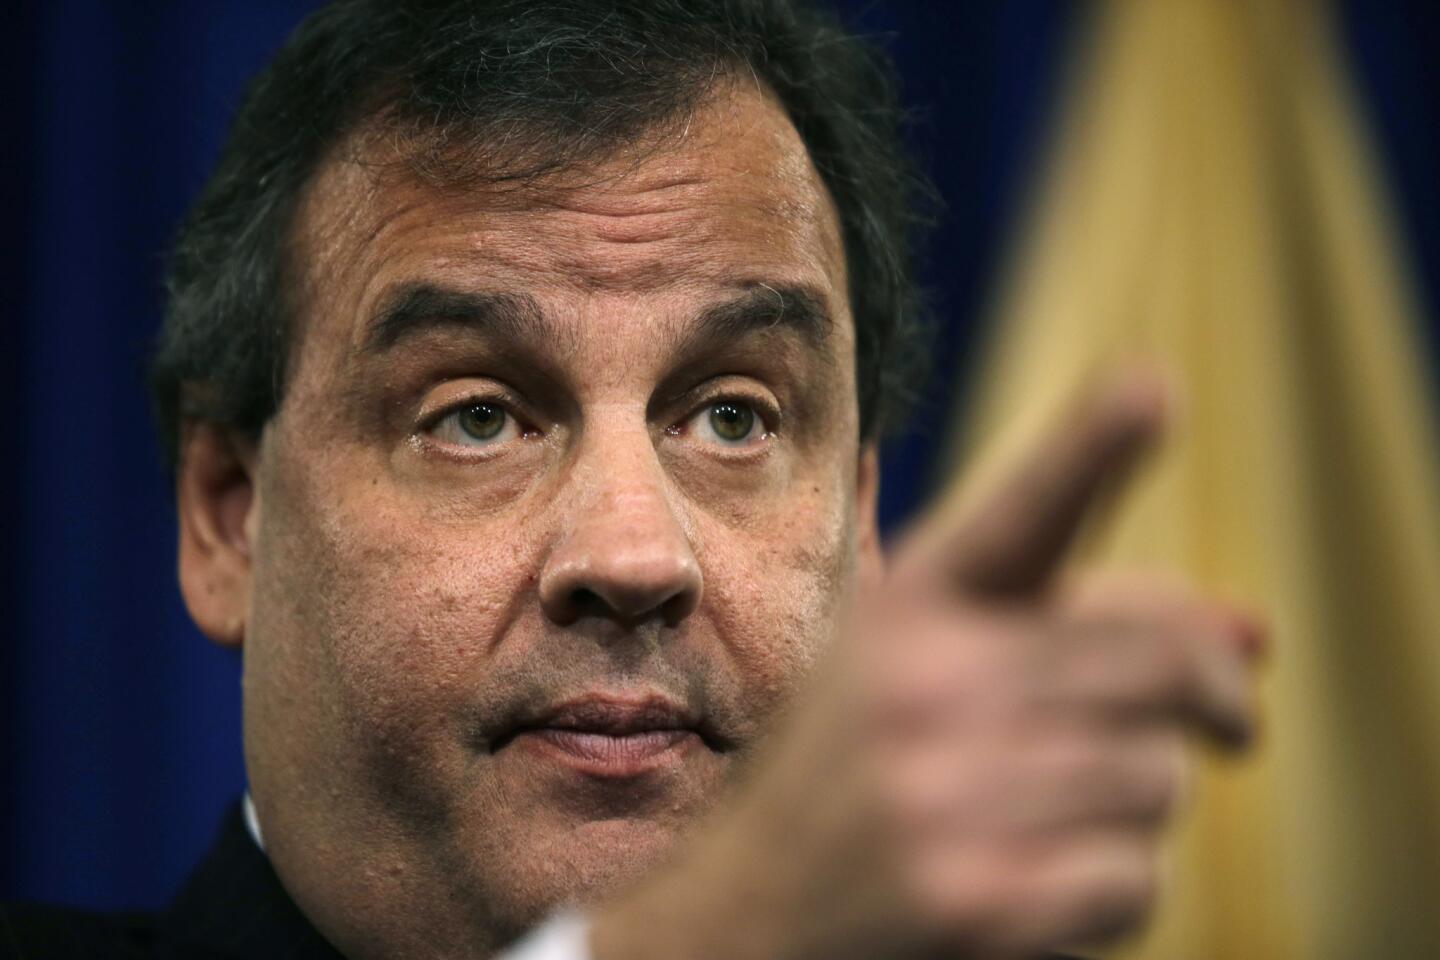 Gov. Chris Christie (R-N.J.) tells reporters he fired his aide behind a scheme to create a traffic jam on the George Washington Bridge as political retribution for a Democratic mayor who did not endorse Christie's reelection bid. "Bridgegate," as it's come to be known, has continued to haunt the possible 2016 candidate.